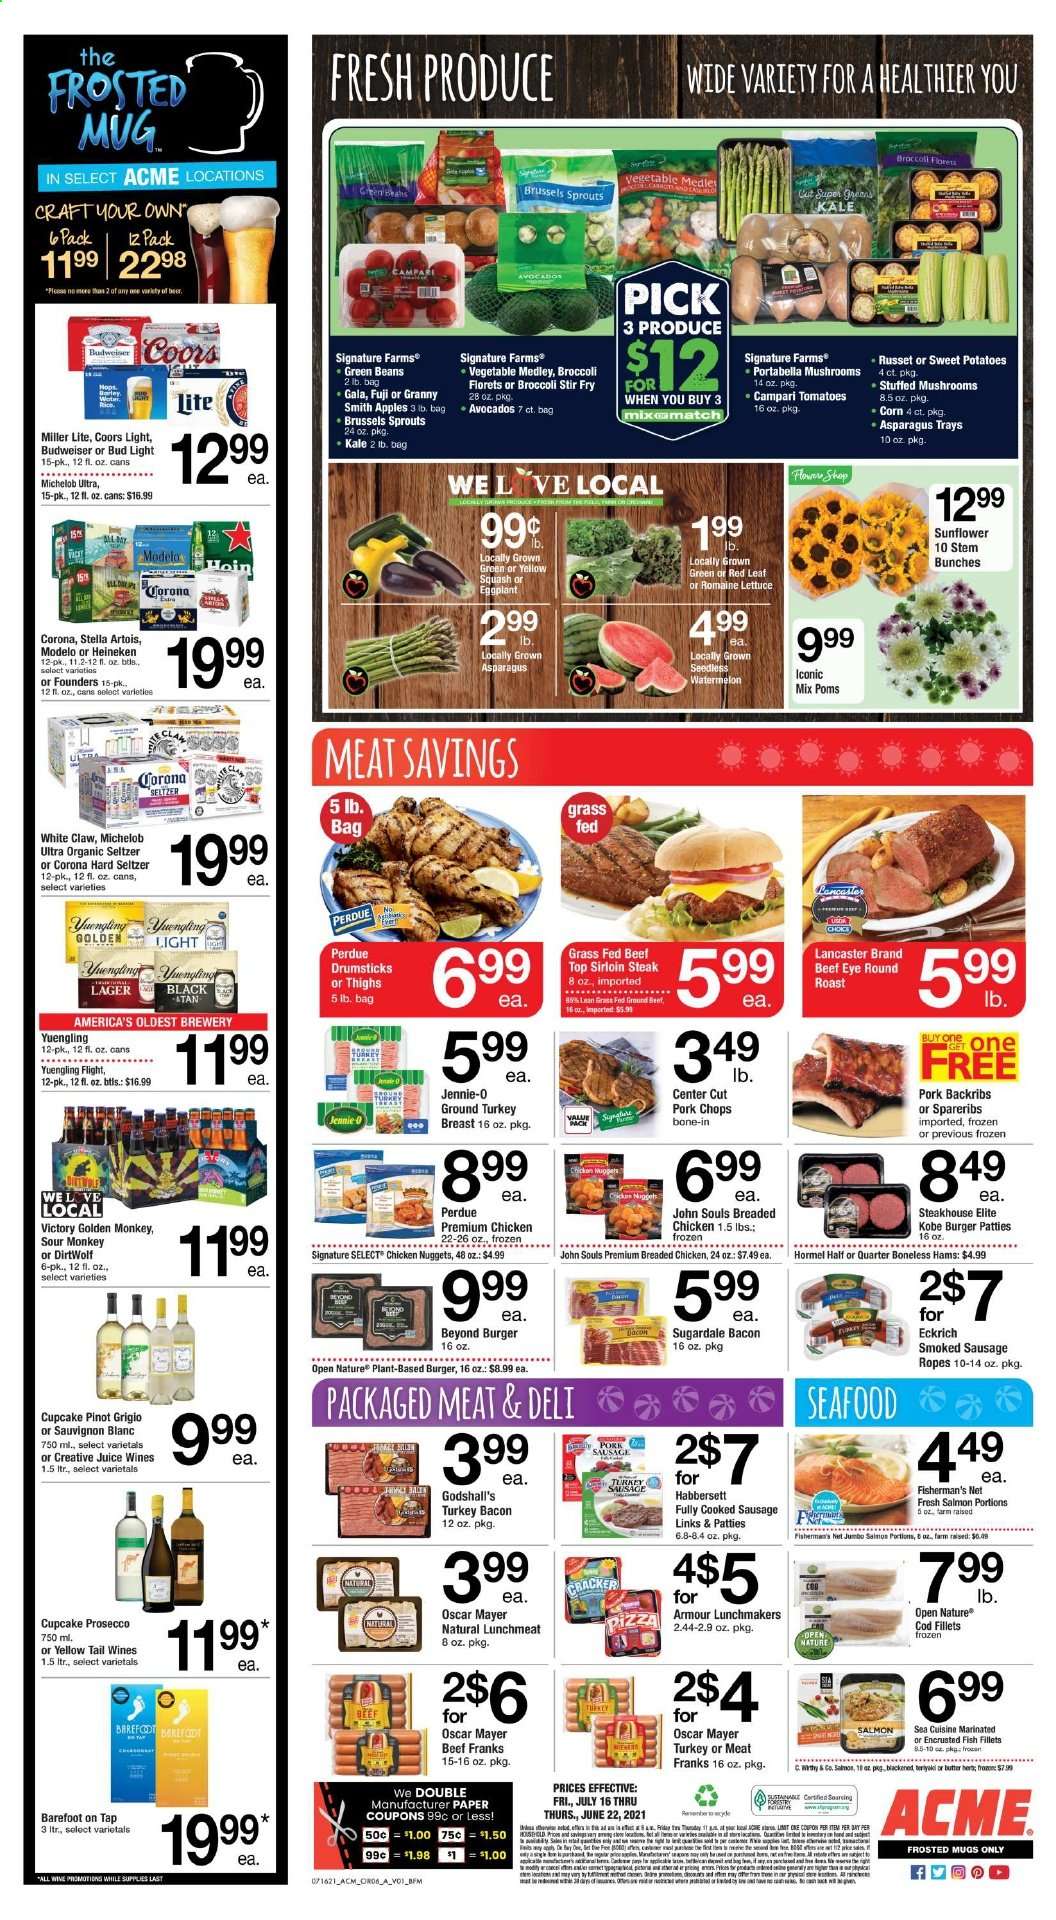 thumbnail - ACME Flyer - 07/16/2021 - 07/22/2021 - Sales products - mushrooms, cupcake, asparagus, beans, broccoli, corn, green beans, russet potatoes, sweet potato, tomatoes, kale, potatoes, lettuce, brussel sprouts, apples, avocado, Gala, watermelon, Granny Smith, cod, fish fillets, salmon, seafood, fish, nuggets, hamburger, fried chicken, chicken nuggets, Perdue®, Hormel, Sugardale, bacon, turkey bacon, Oscar Mayer, smoked sausage, lunch meat, butter, crackers, Ace, juice, white wine, prosecco, Pinot Grigio, Sauvignon Blanc, White Claw, Hard Seltzer, beer, Budweiser, Miller Lite, Stella Artois, Coors, Yuengling, Michelob, Bud Light, Corona Extra, Heineken, Lager, Victory Golden, Modelo, ground turkey, turkey breast, beef meat, beef sirloin, steak, eye of round, round roast, sirloin steak, burger patties, pork chops, pork meat, pork spare ribs, mug, paper, monkey. Page 6.